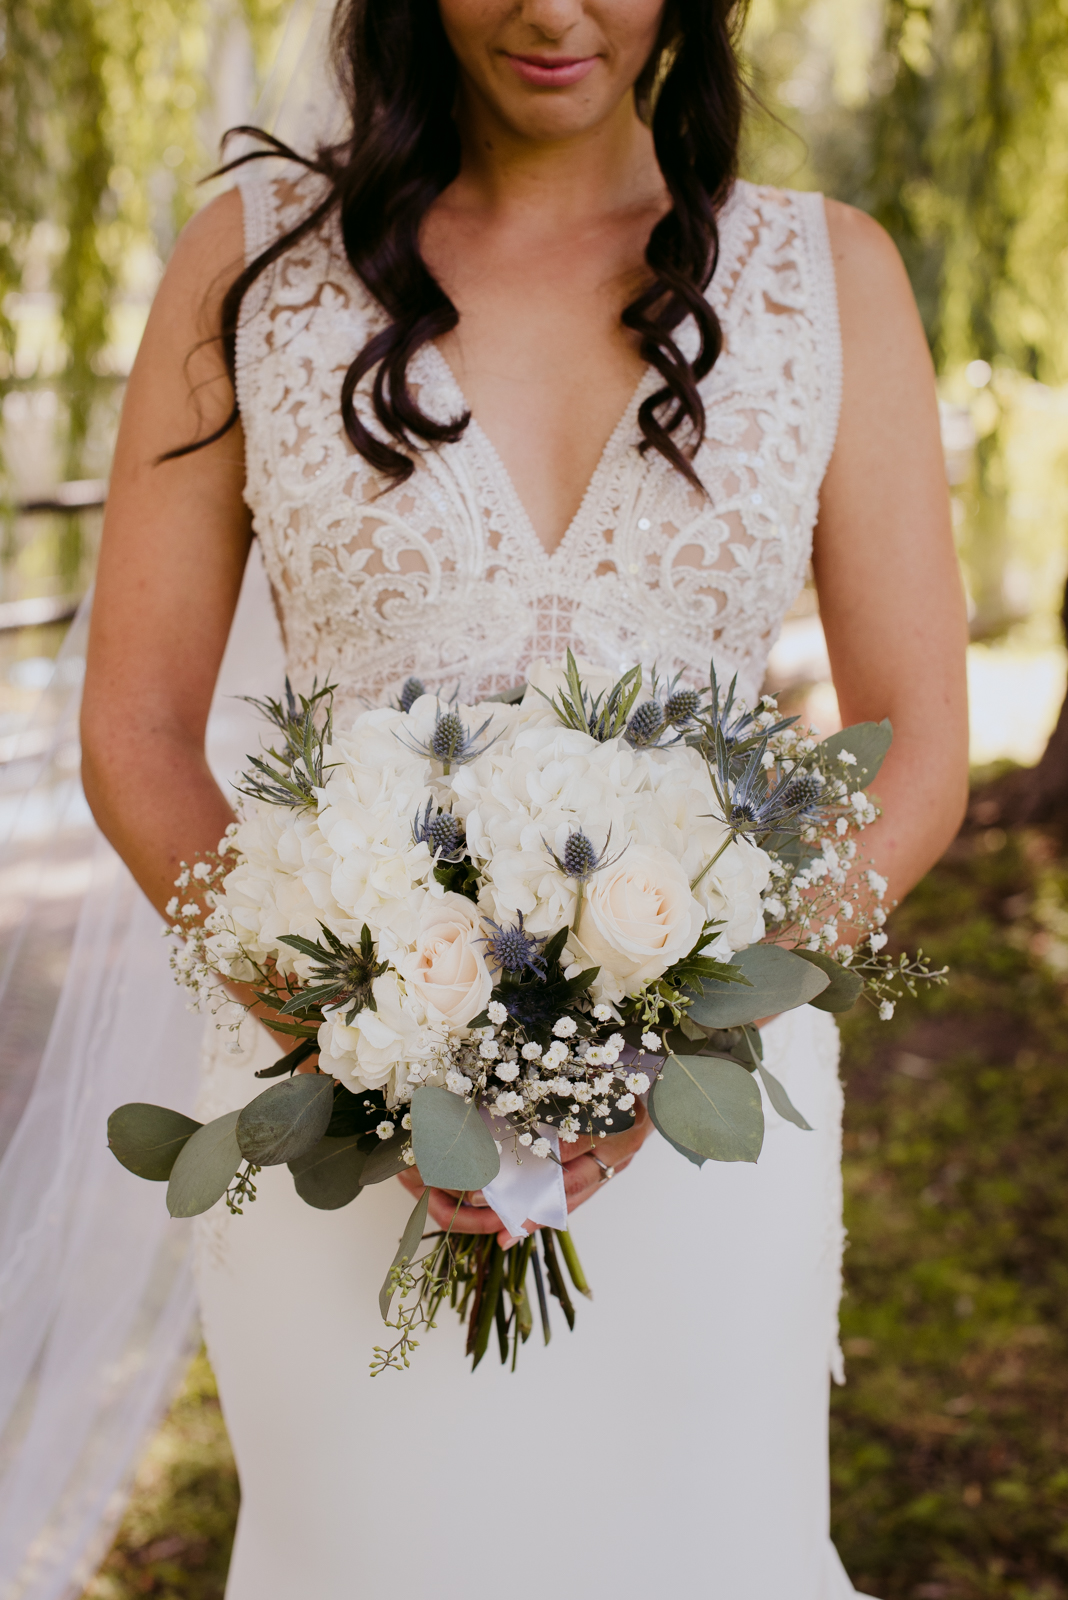 bride holding wedding bouquet in the willow trees by patterson's creek